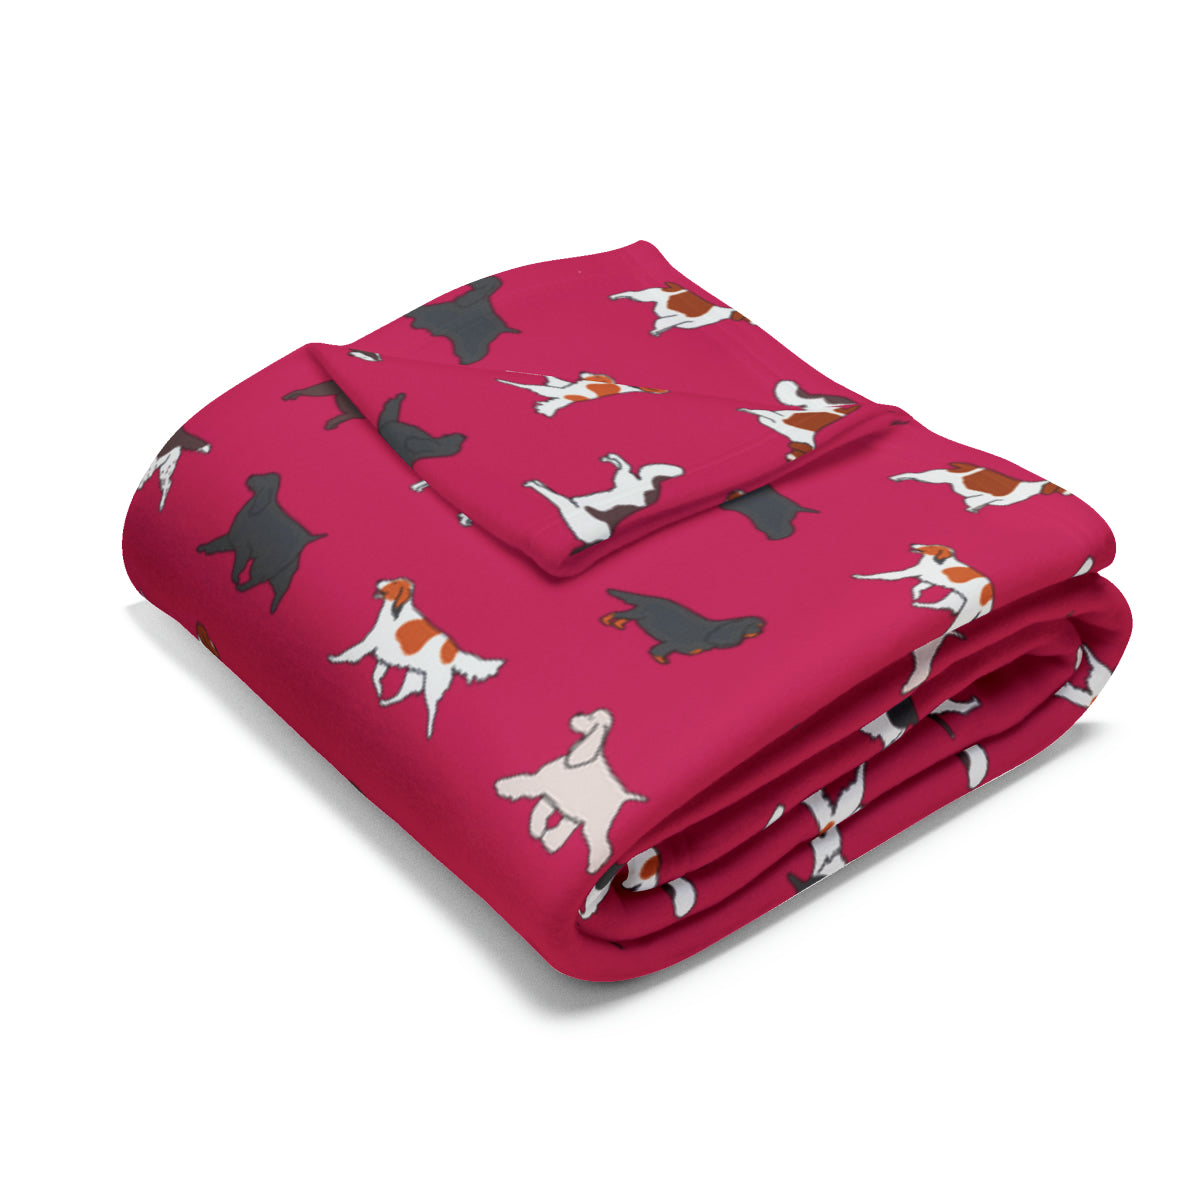 Spaniel Breed Arctic Fleece Blanket in White Grey Blue and Pink